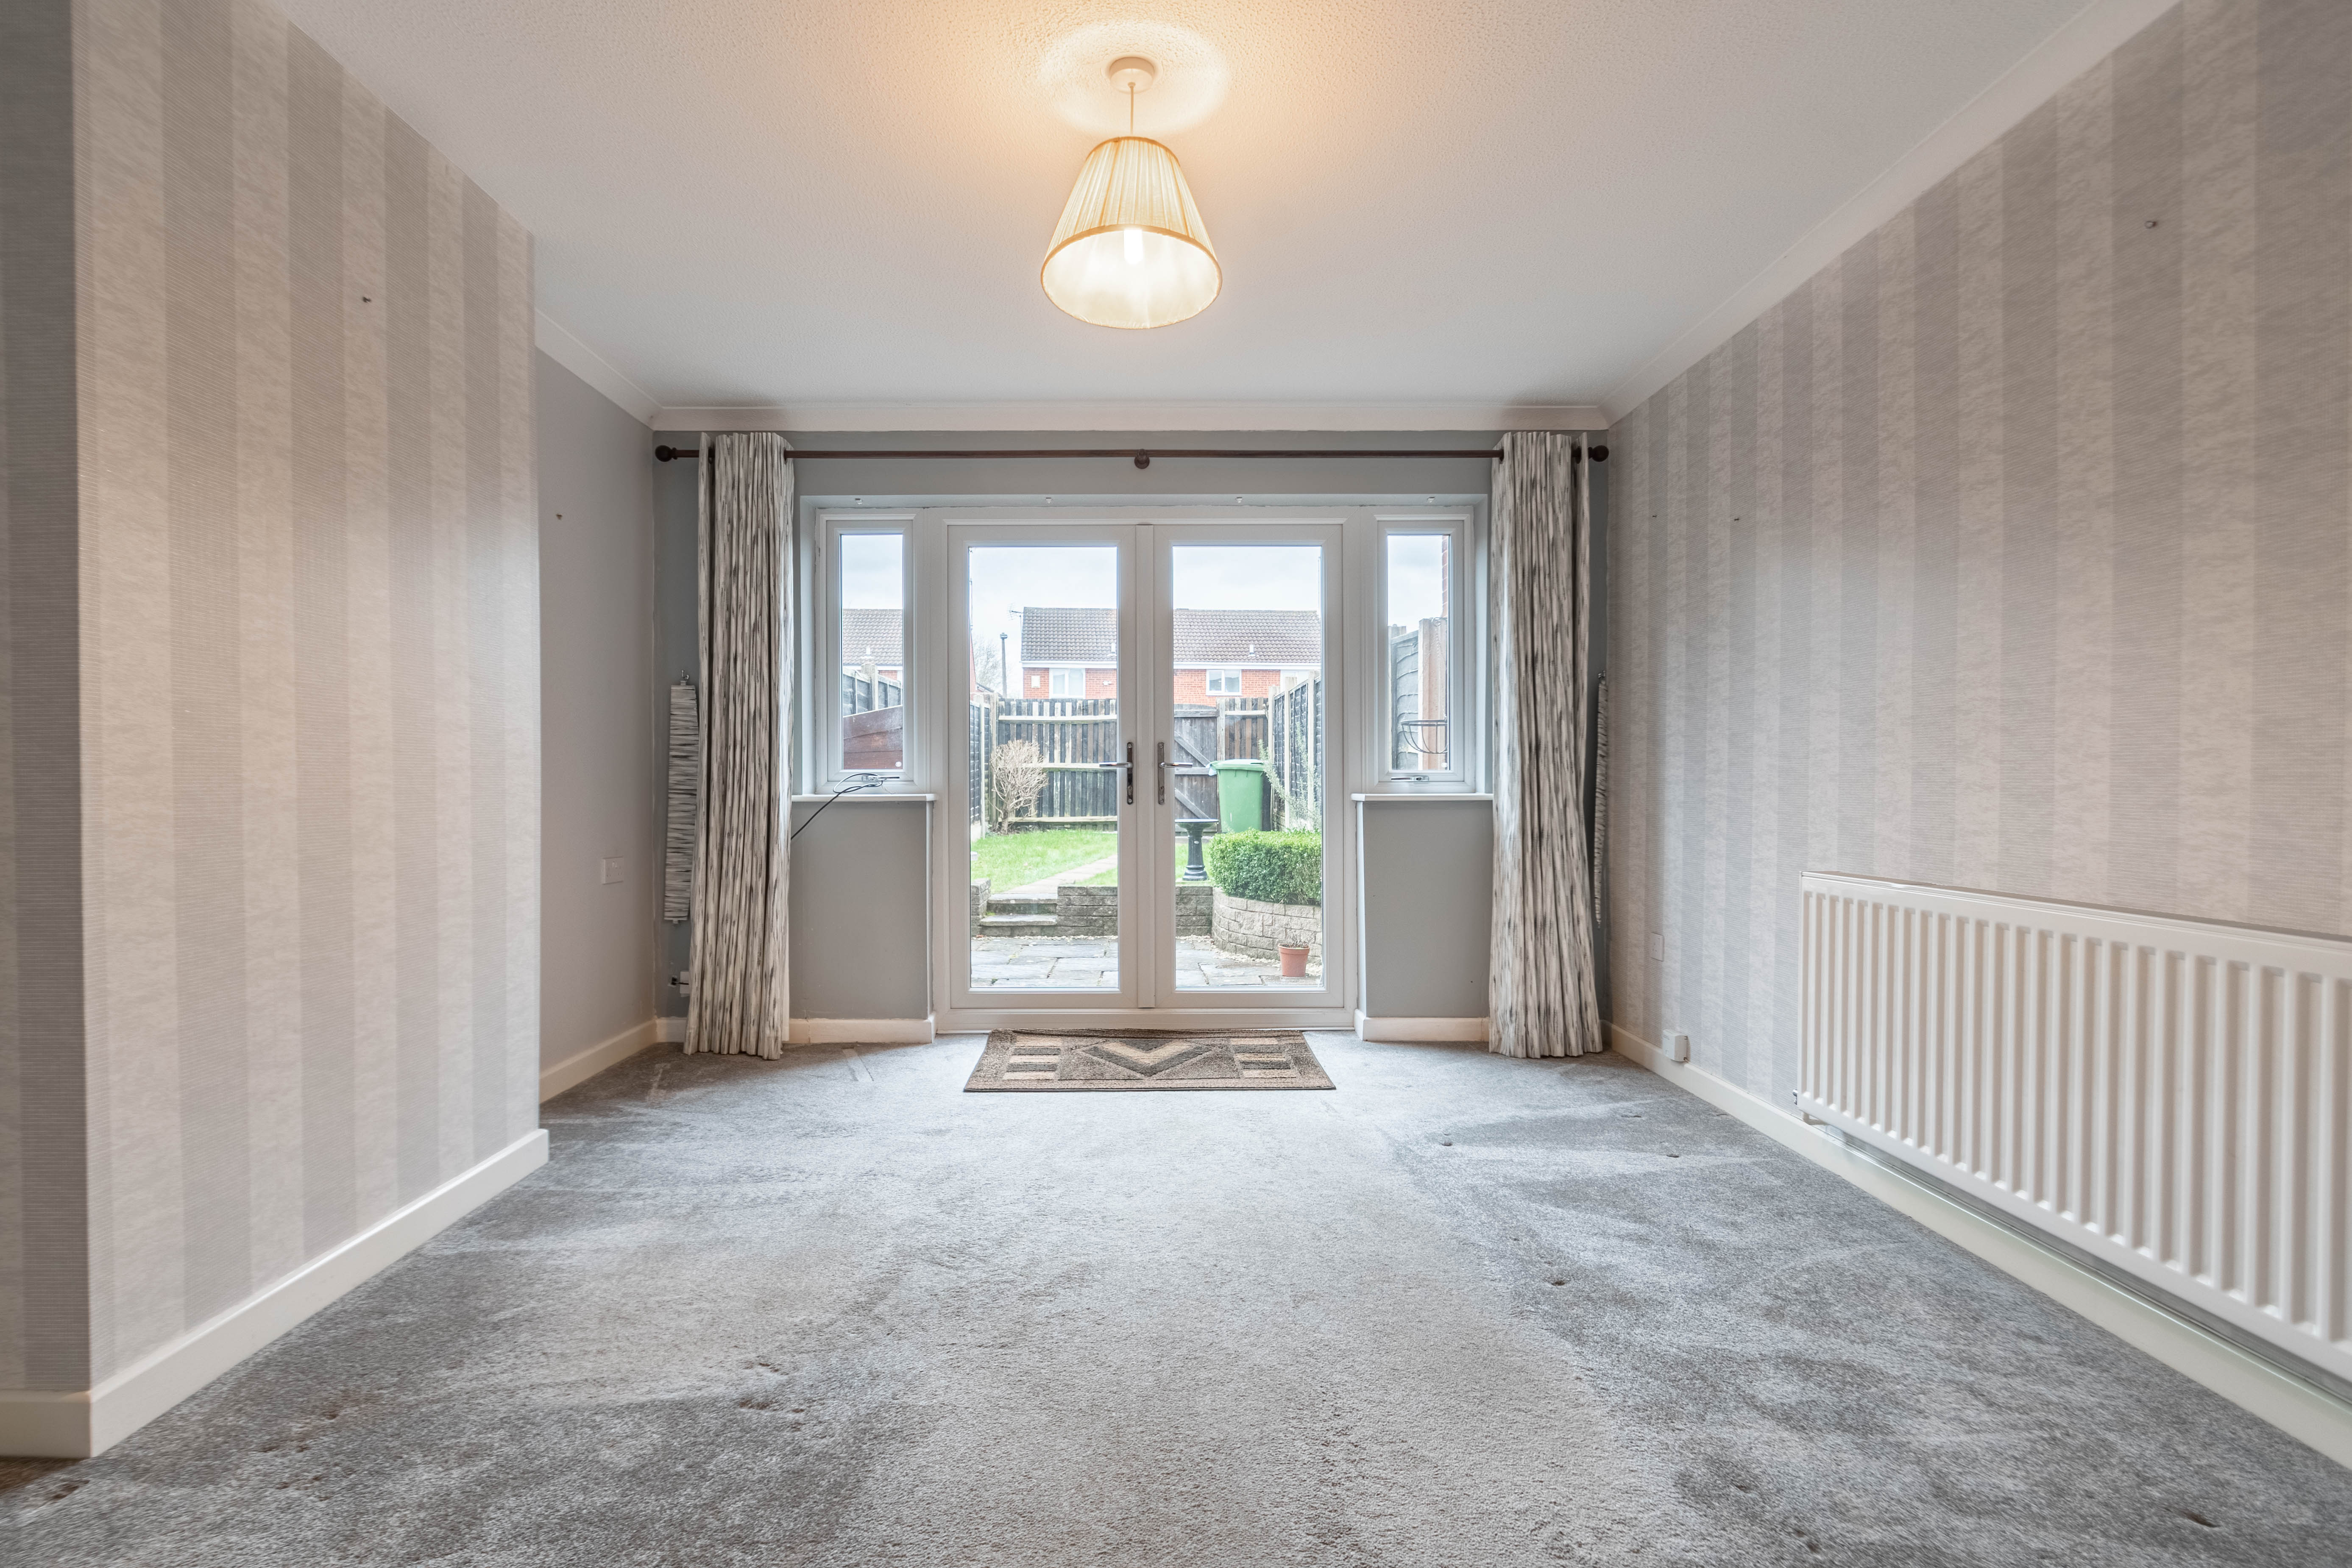 2 bed house for sale in Abbotswood Close, Winyates Green 6